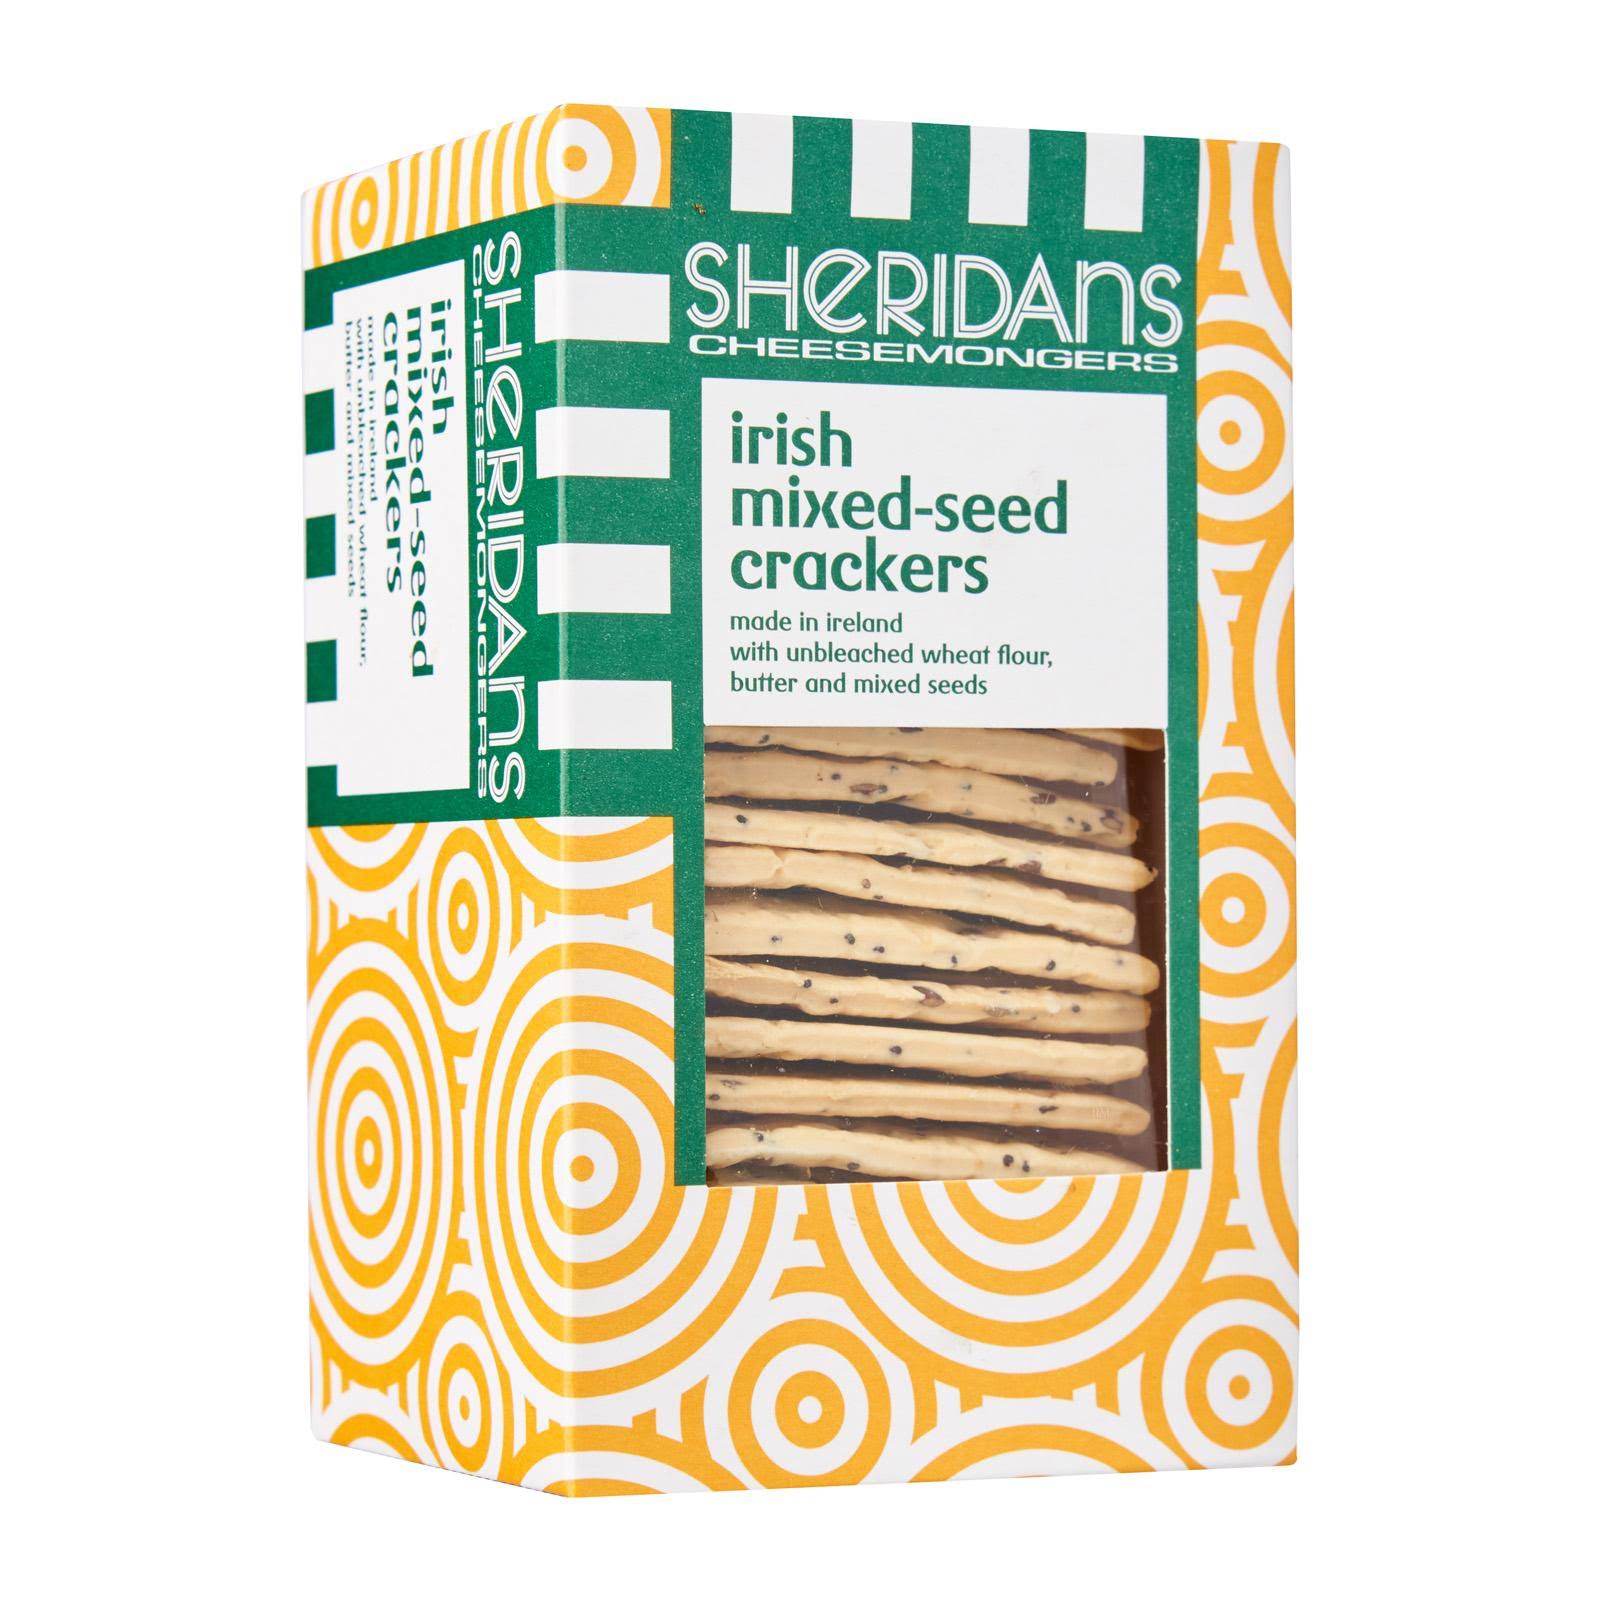 Neal's Yard Dairy Sheridans Mixed Seed Crackers